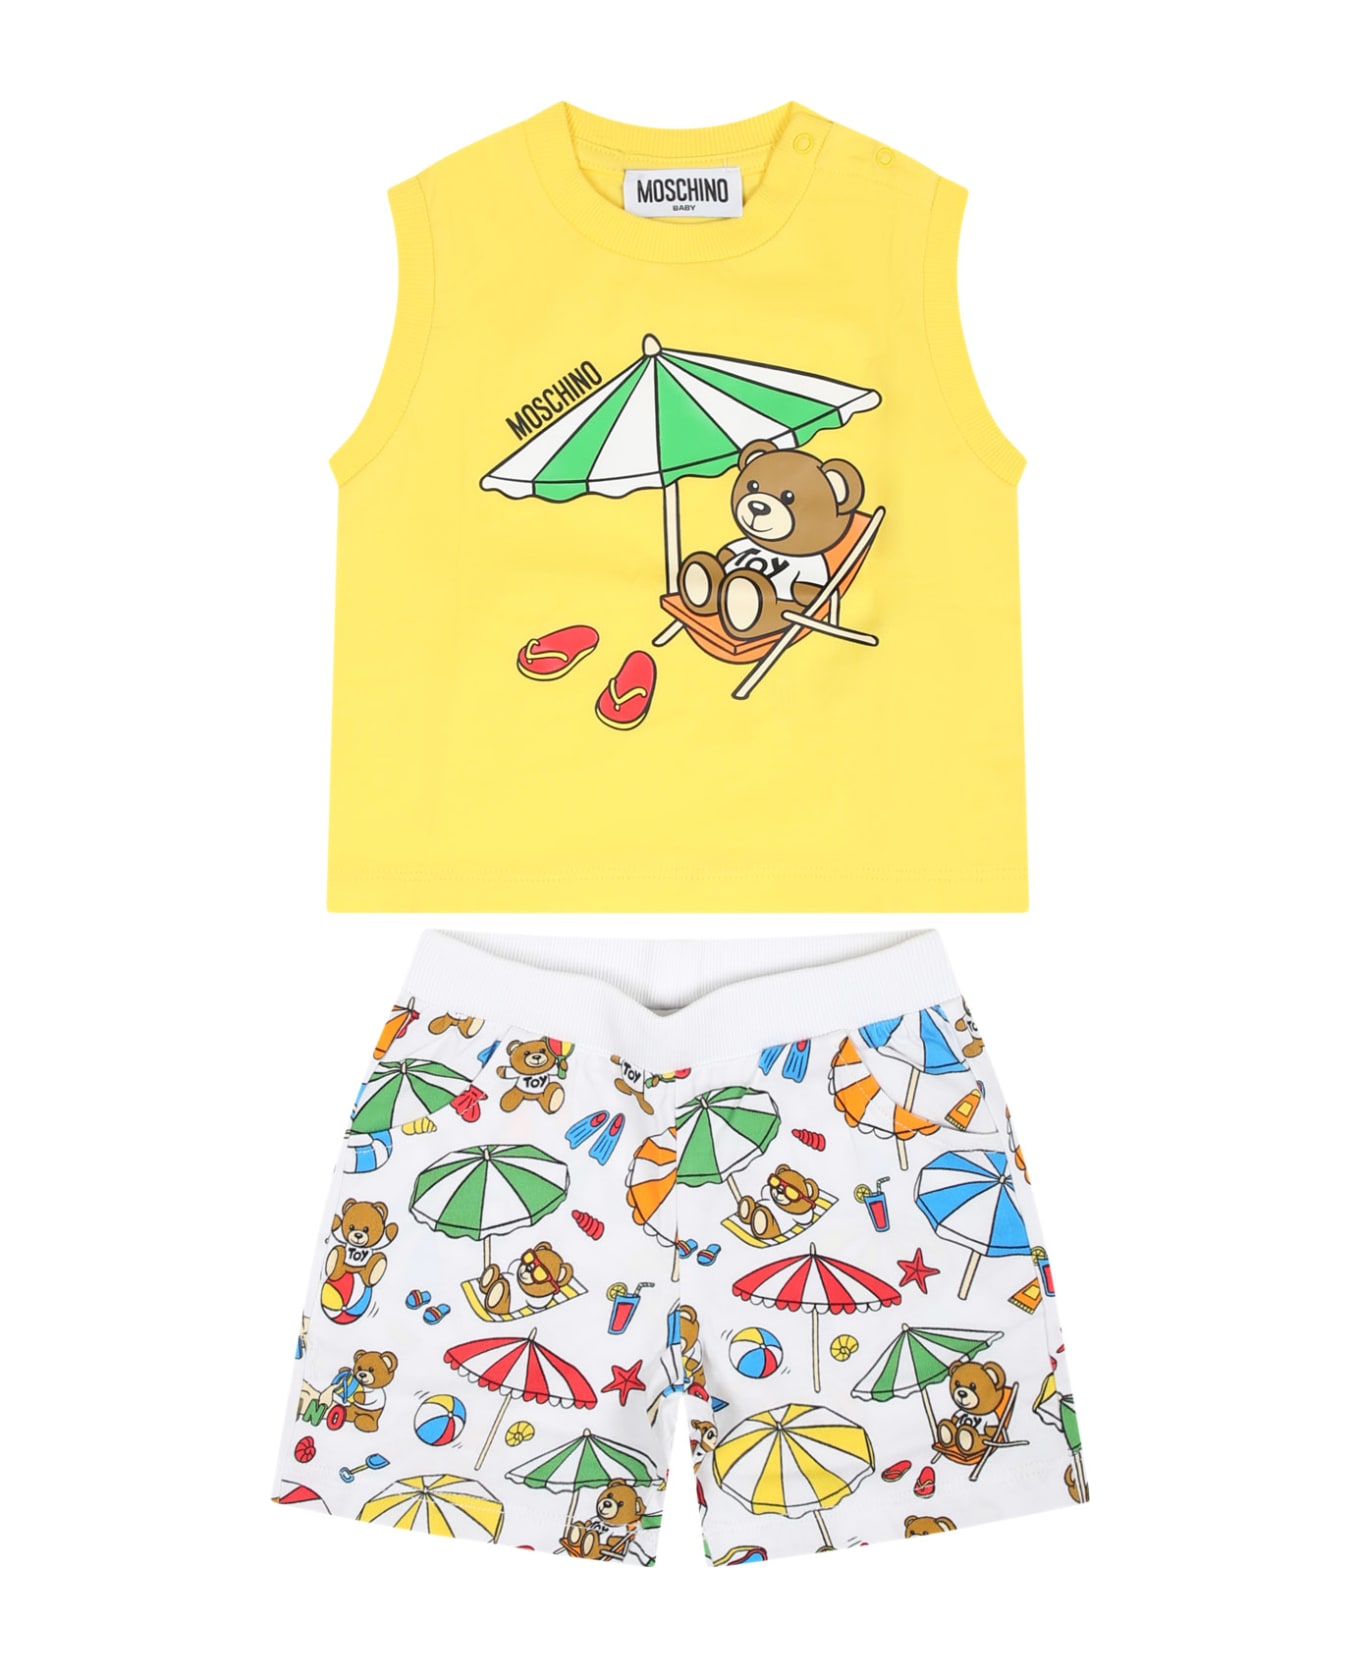 Moschino Yellow Sports Suit For Baby Boy With Teddy Bear - Yellow